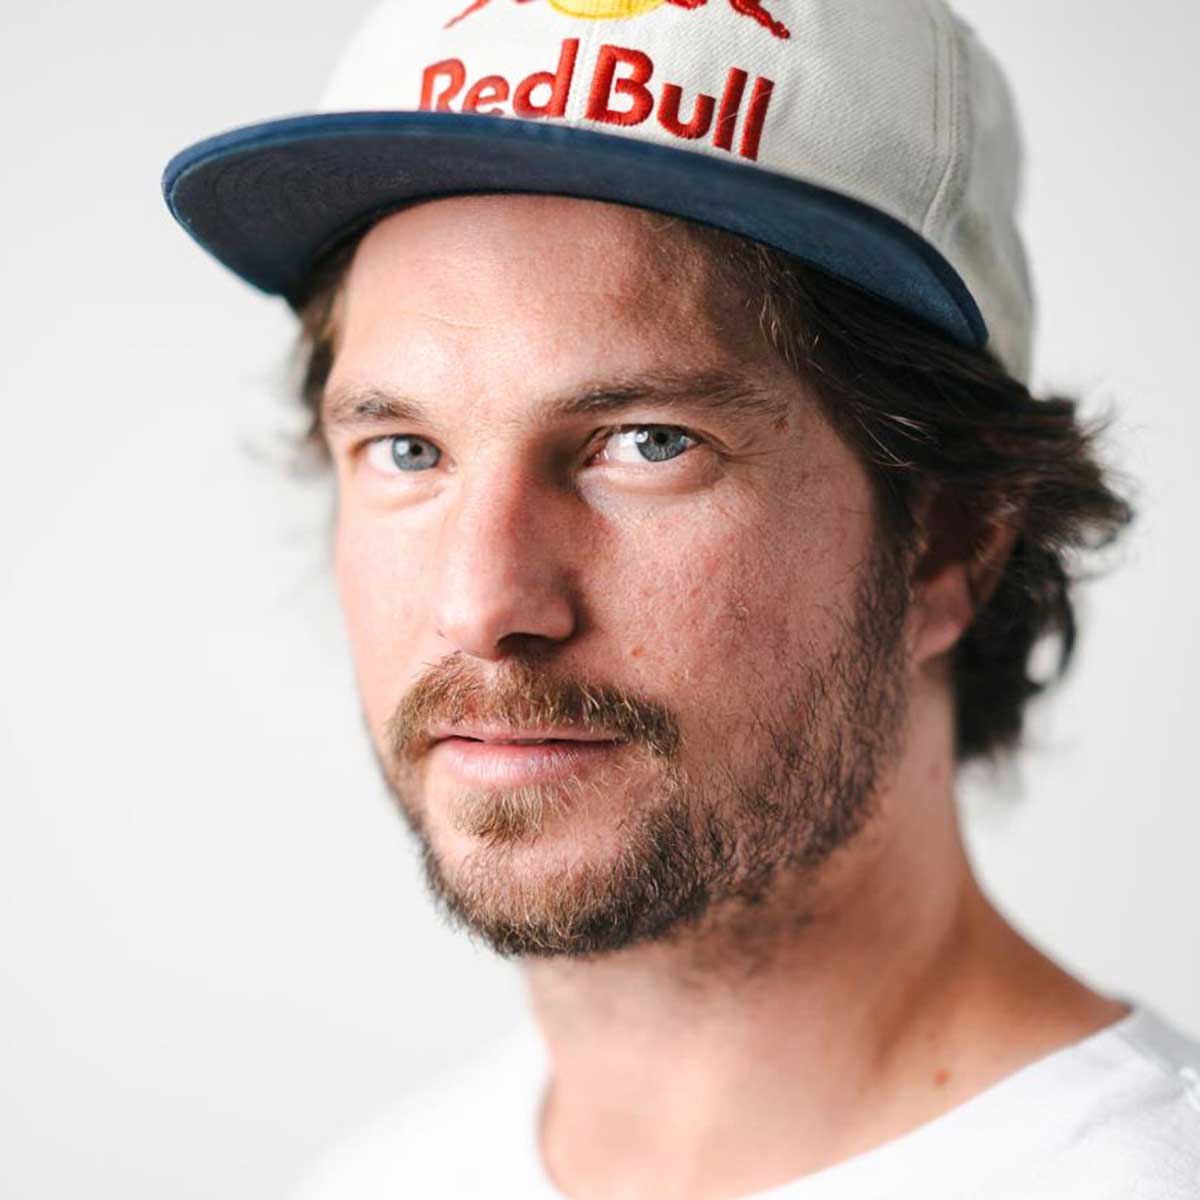 Profile image of Torey Pudwill